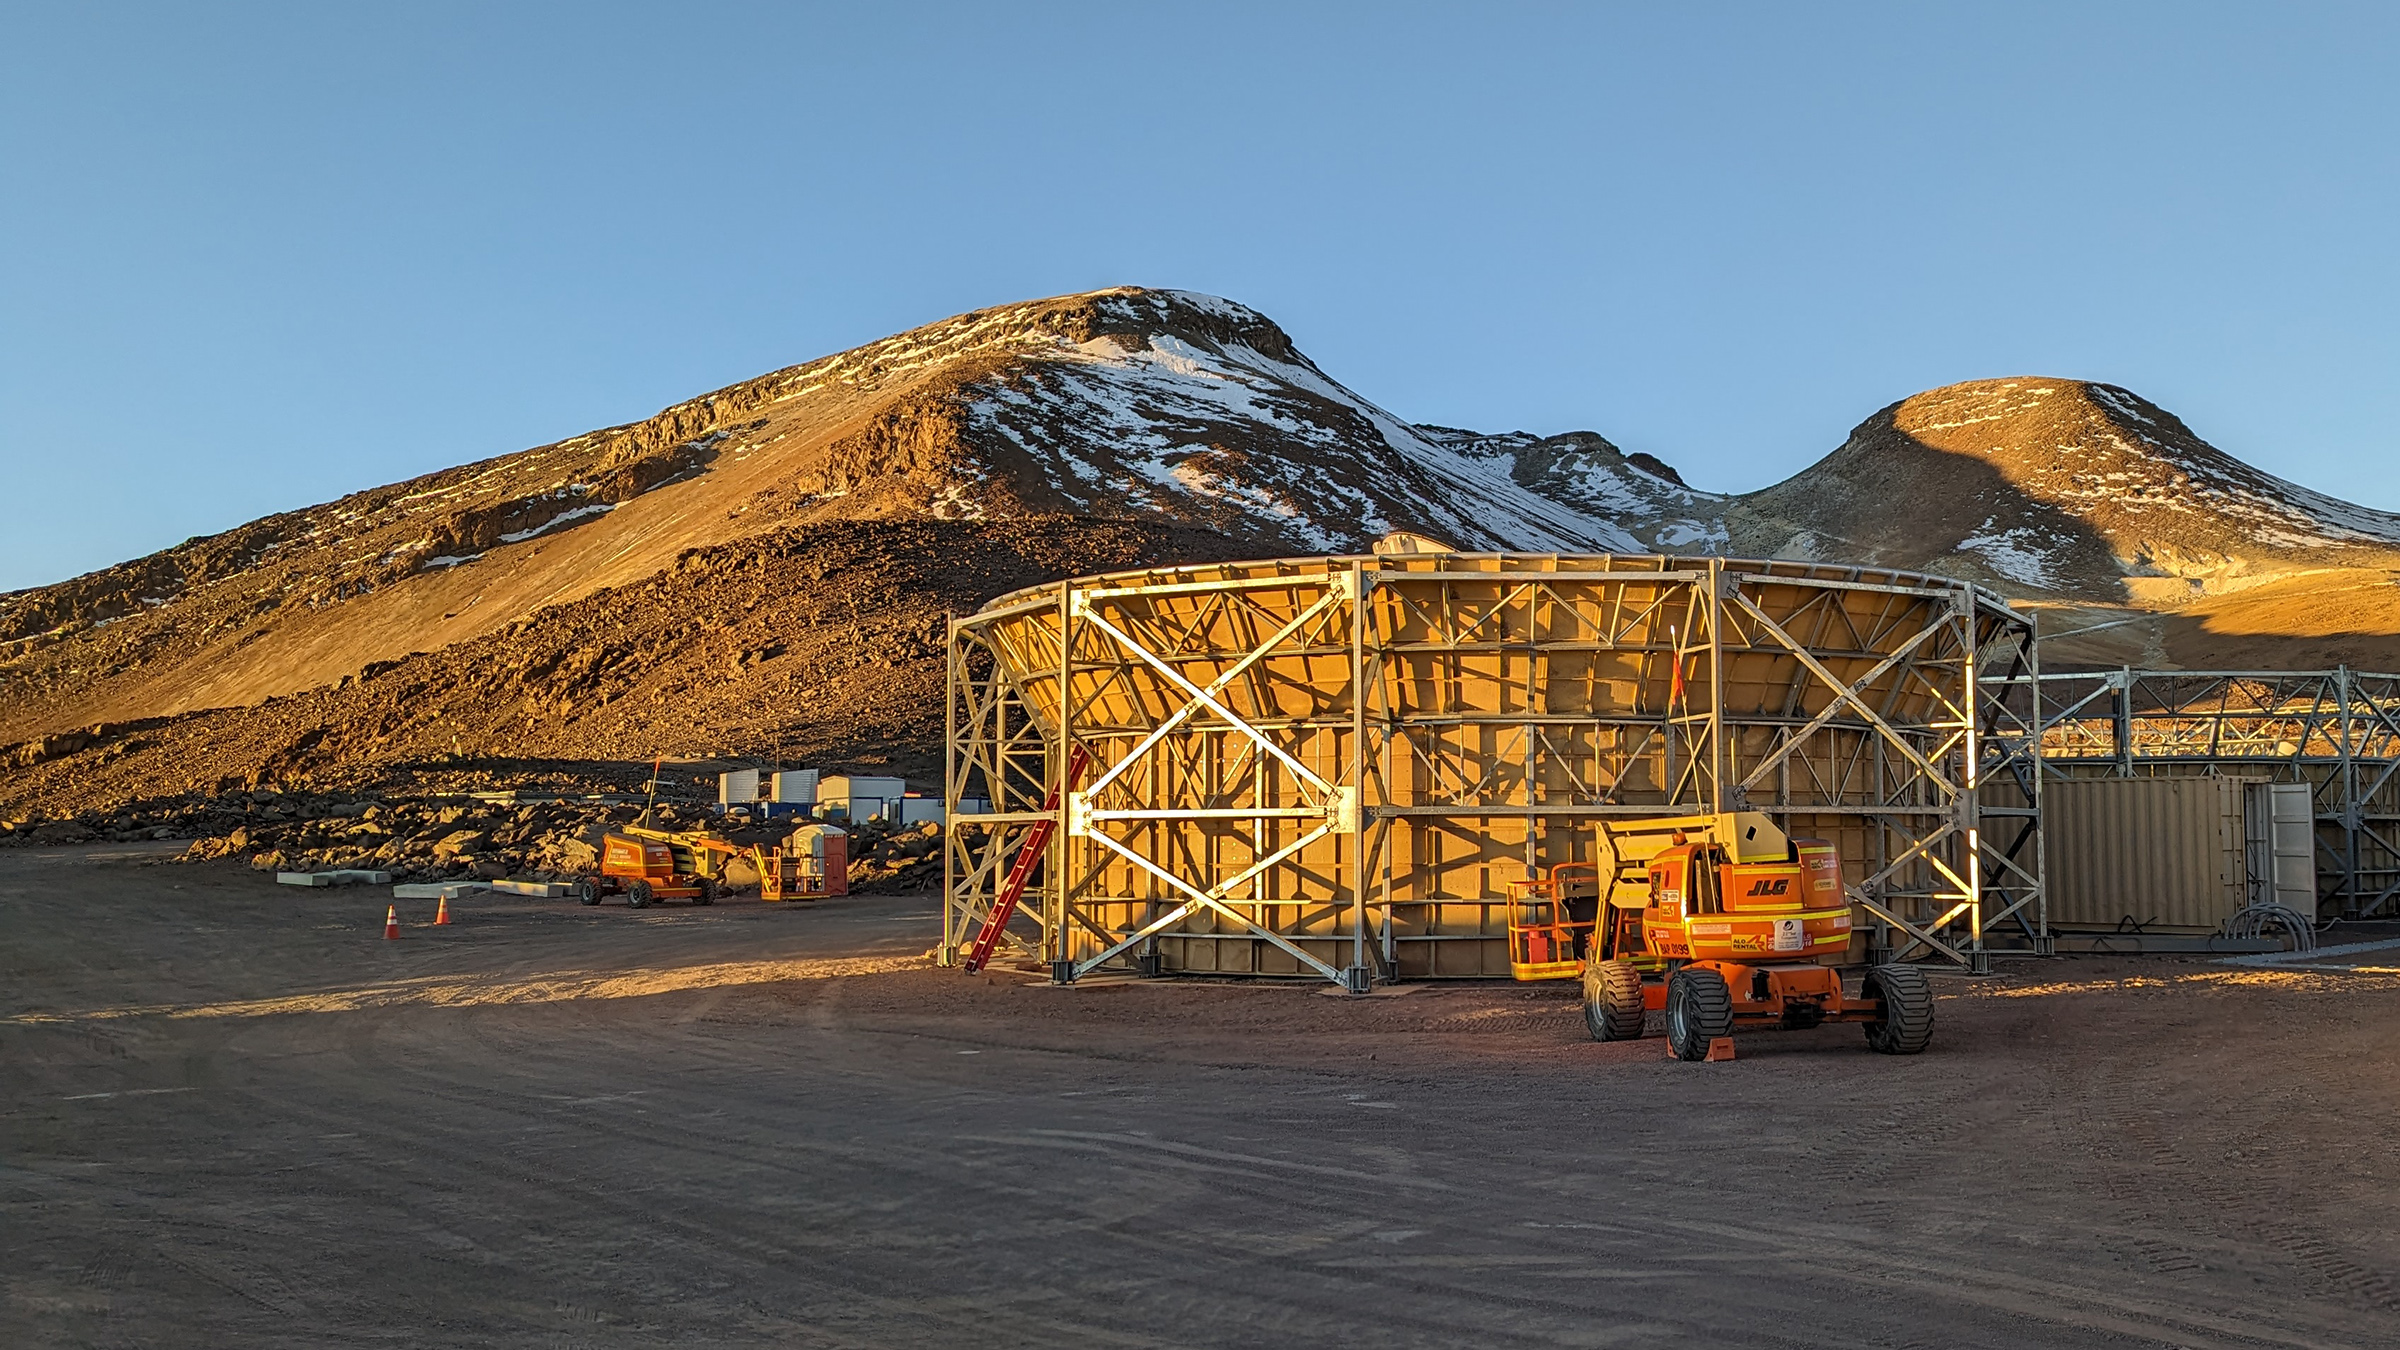 A telescope enclosure sits in front of two mountains under a blue sky